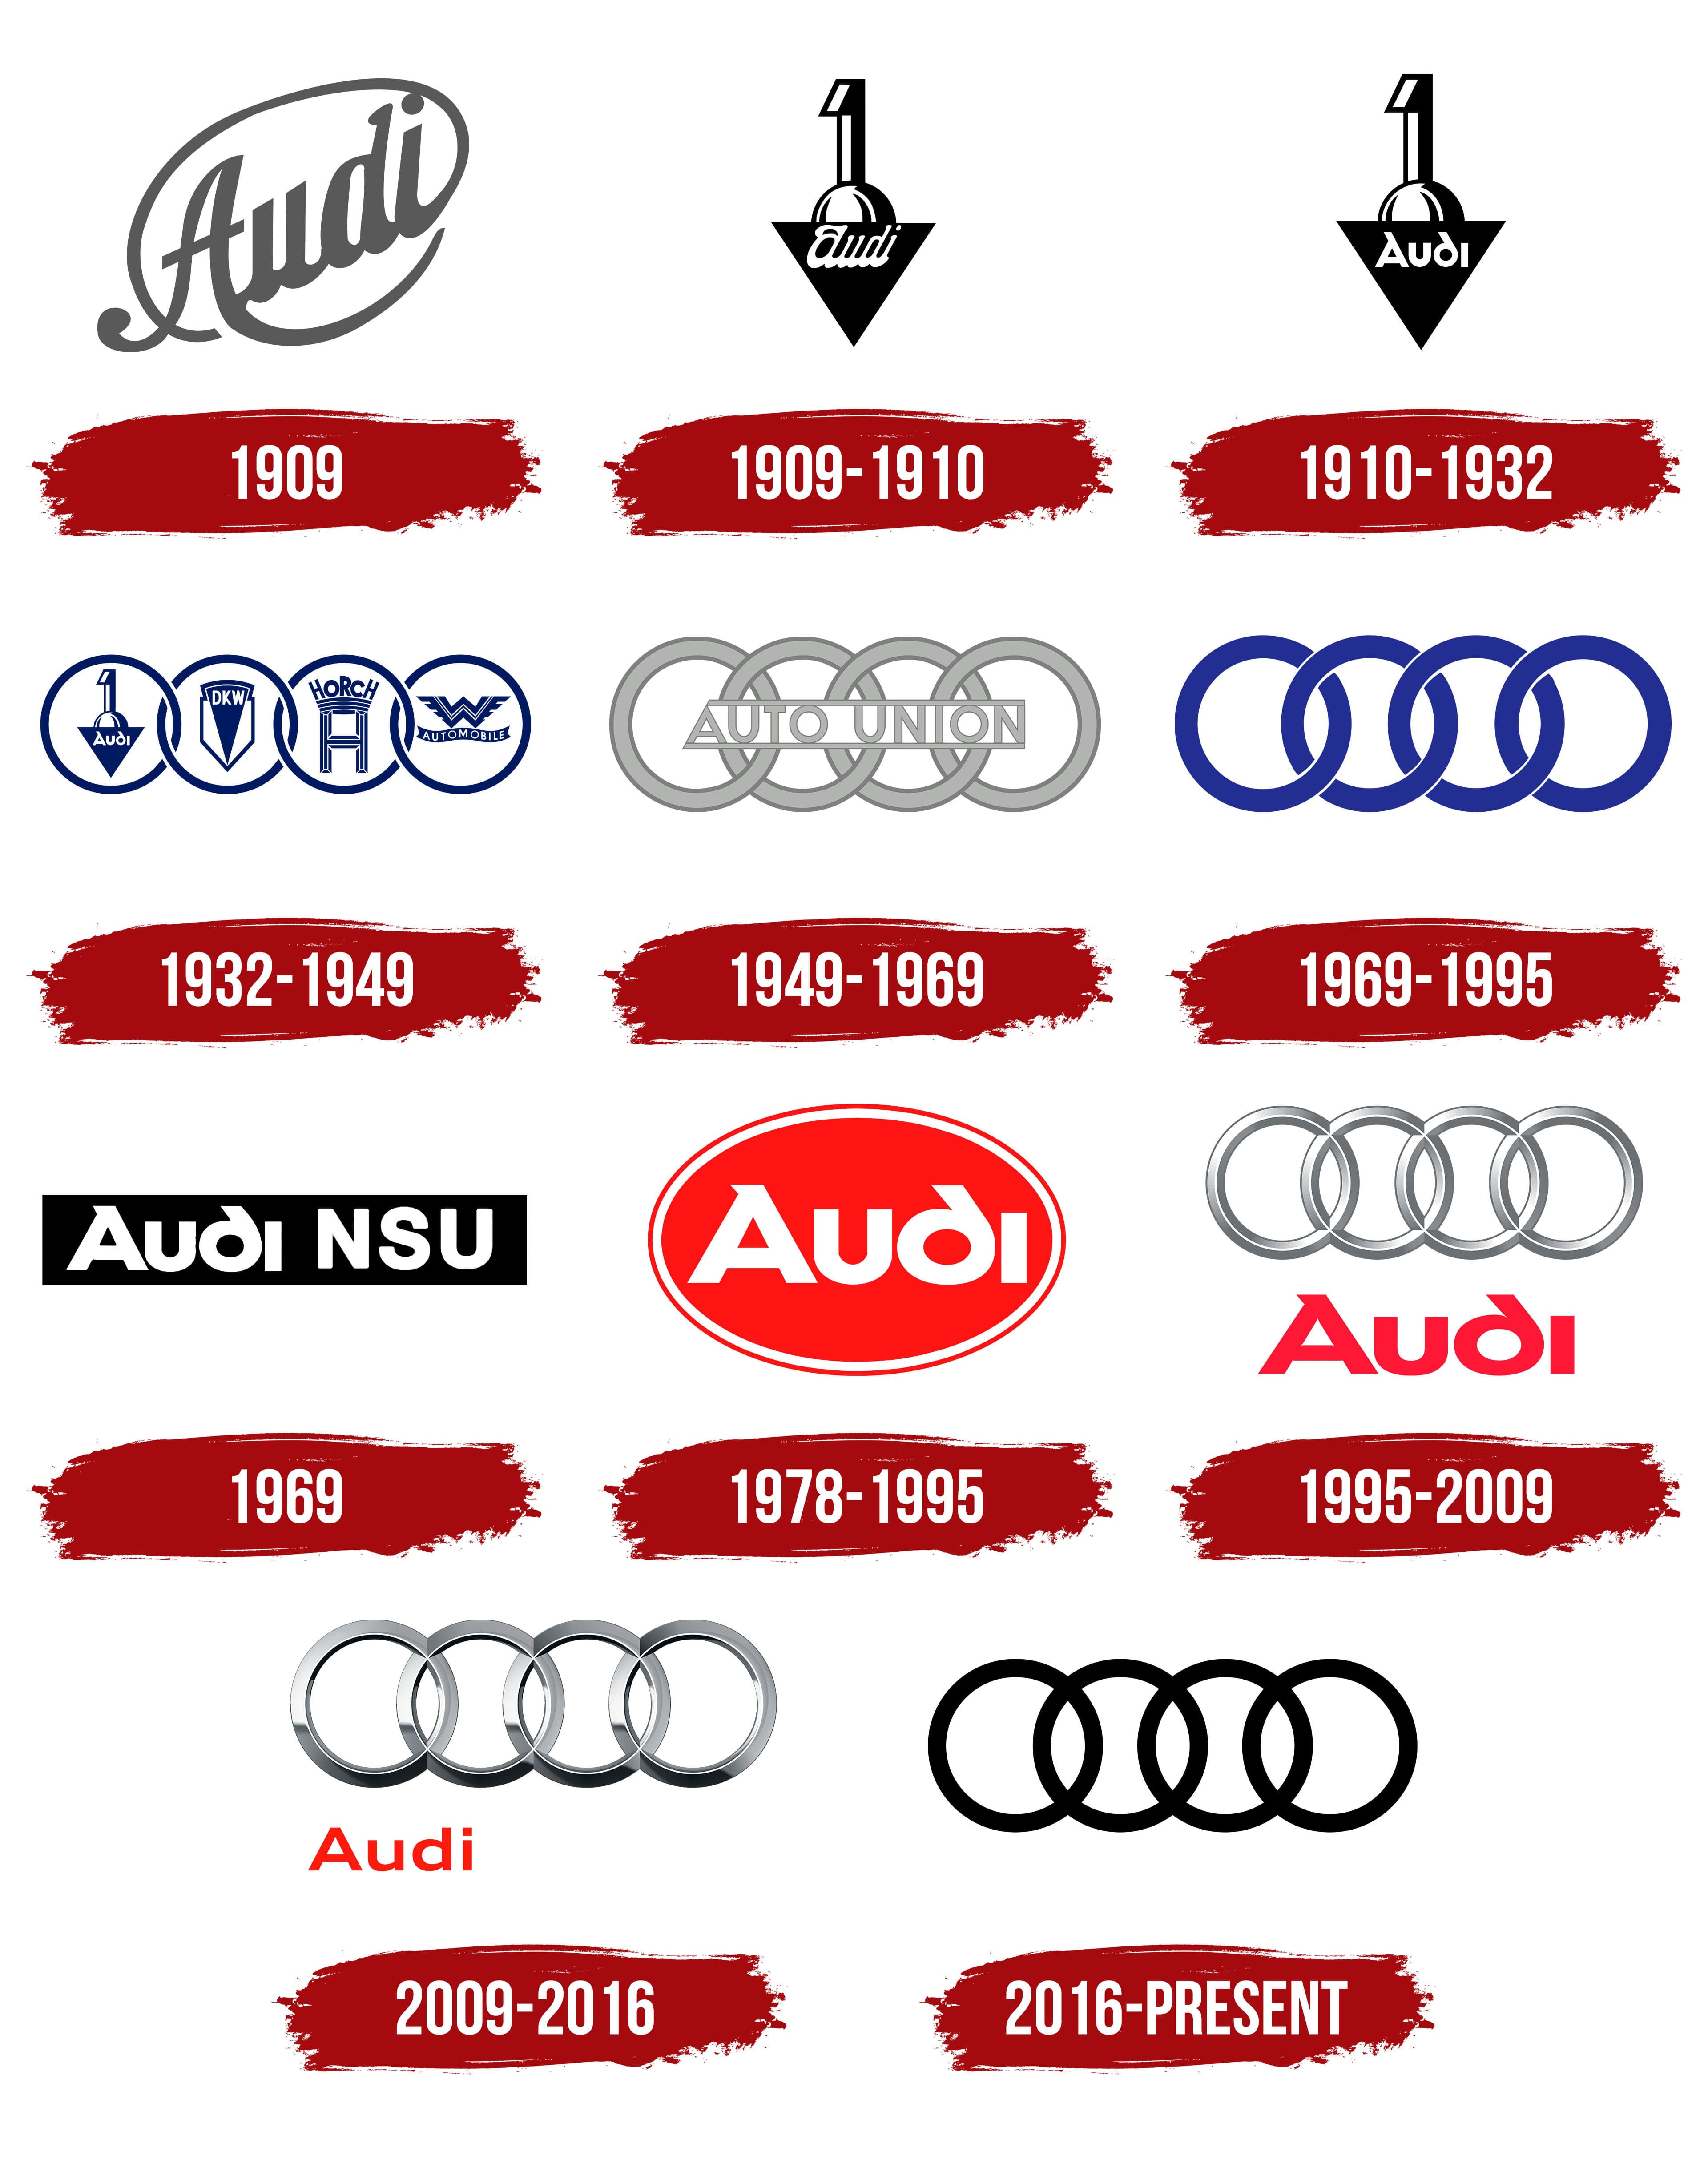 New Audi Logo Patents Filed In The US & Germany: Details, Images, Meaning &  More - DriveSpark News